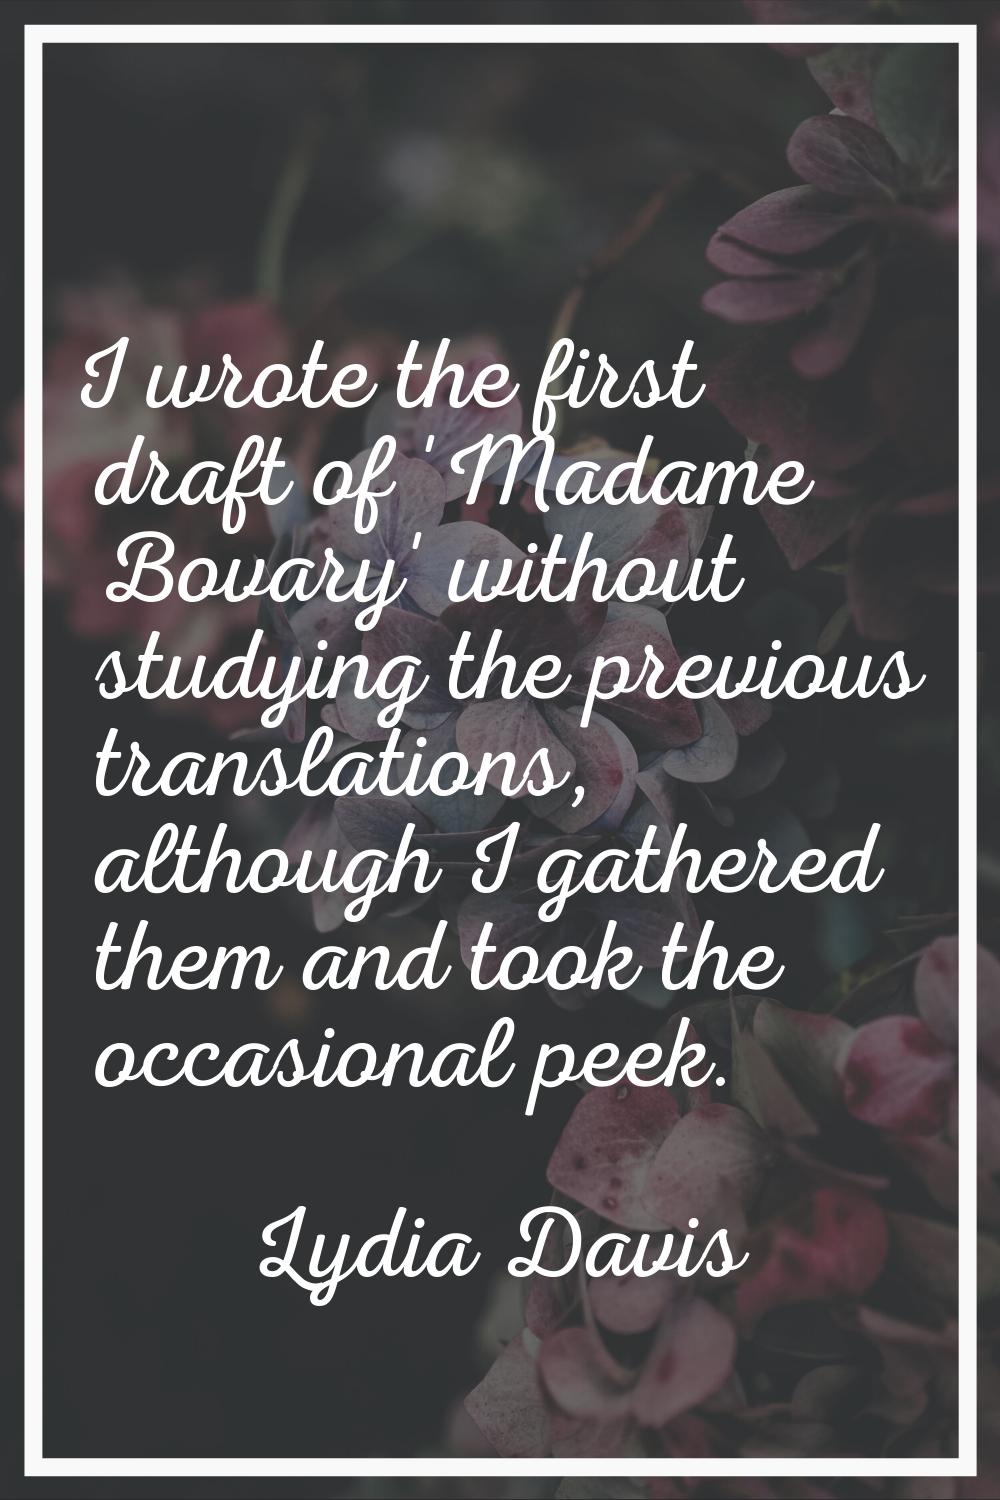 I wrote the first draft of 'Madame Bovary' without studying the previous translations, although I g